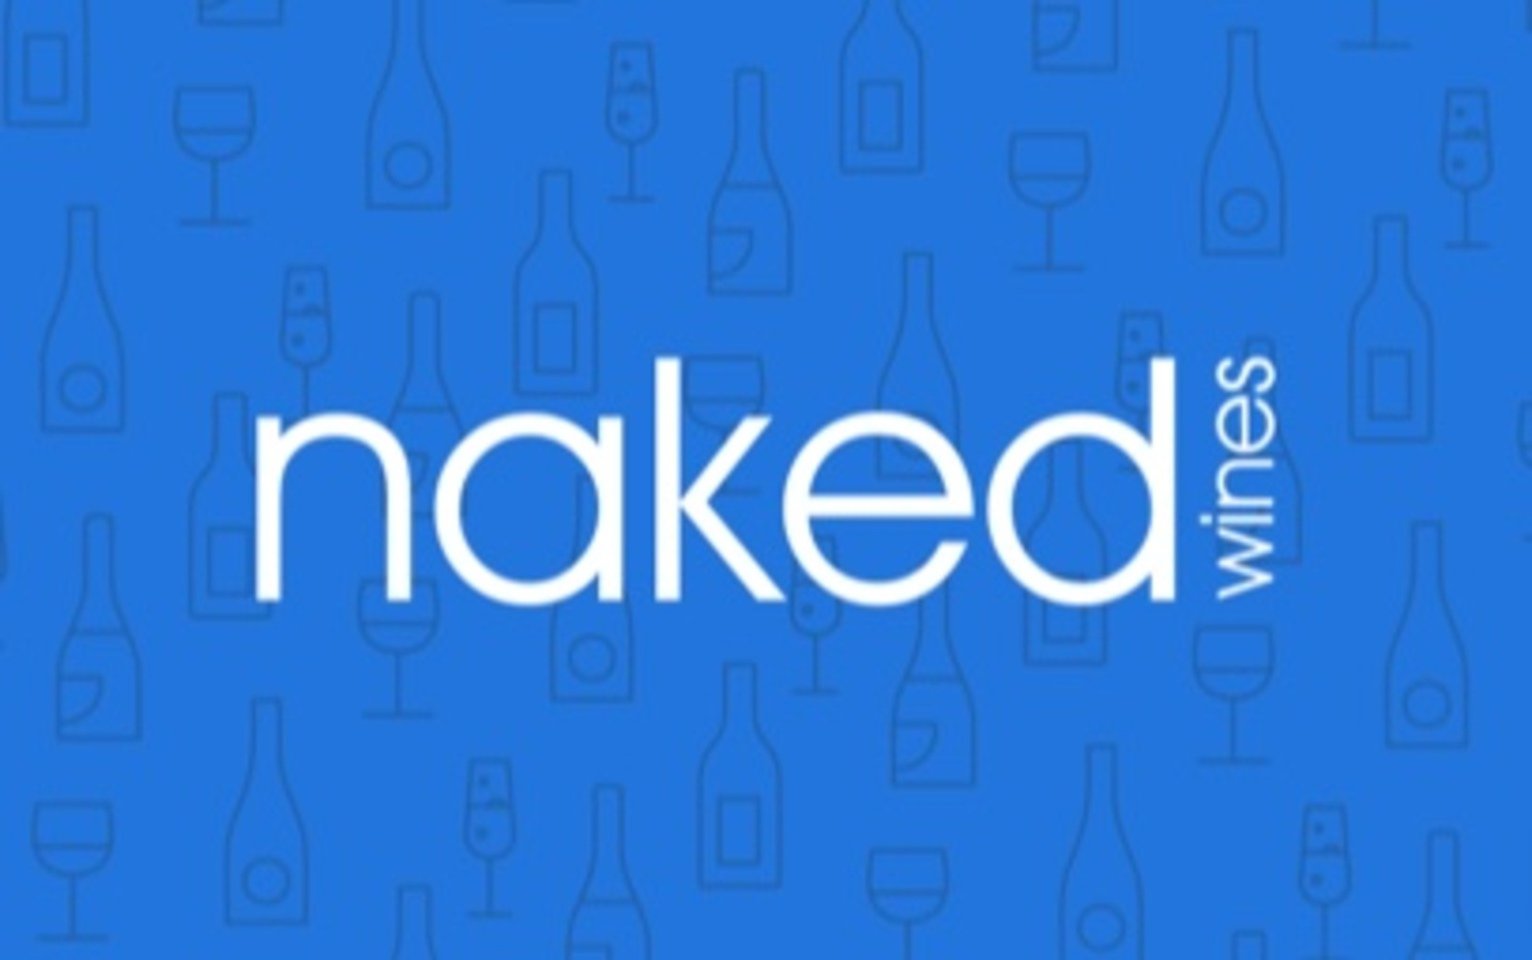 Naked Wines Gift Card